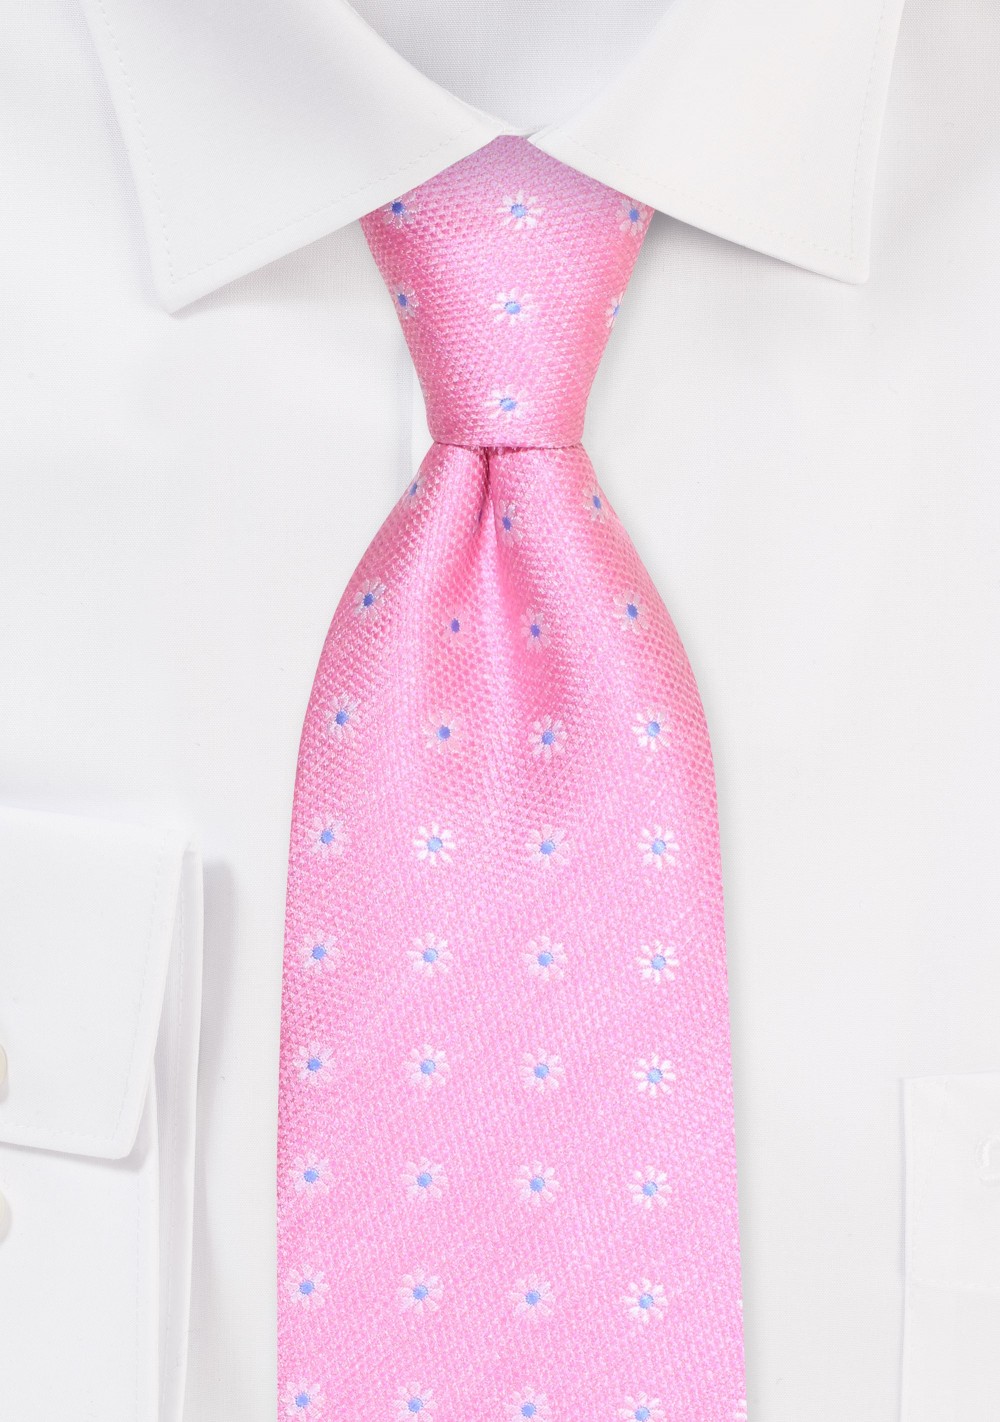 Pink Textured Kids Tie with Embroidered Florals